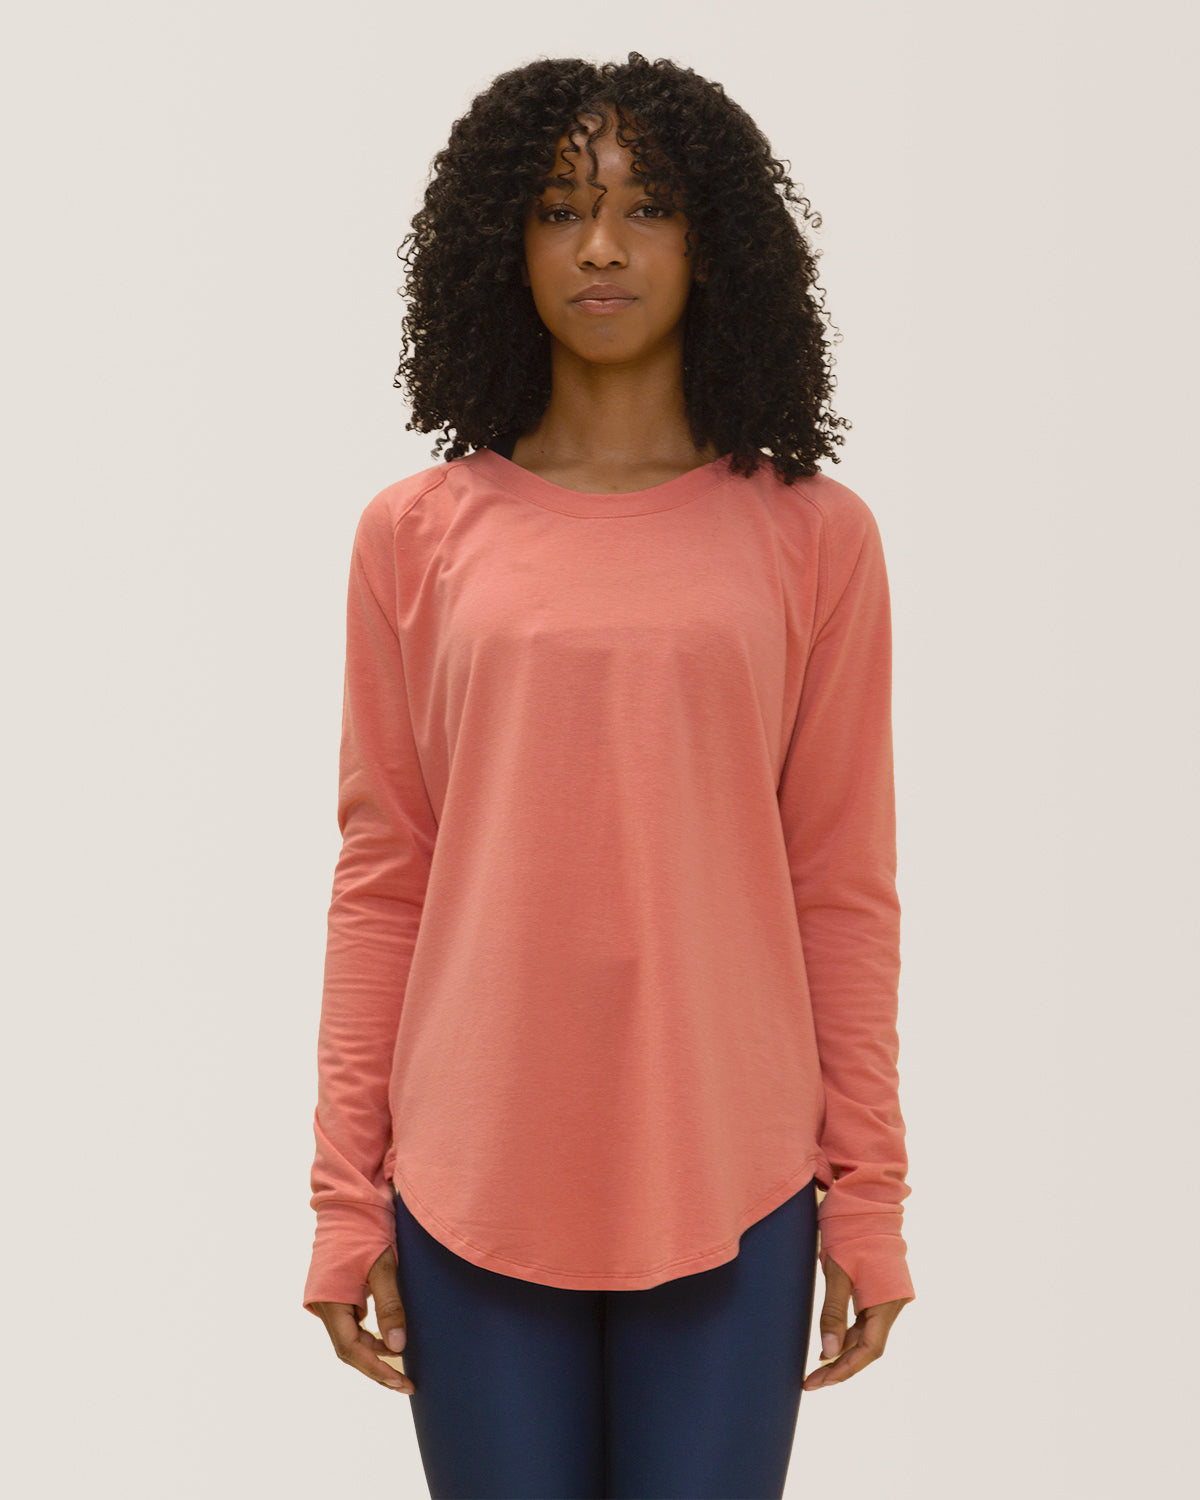 Cozy Long Sleeves Rose Boreal/ Chandail Confo Rose Boreal- Coral / Corail.